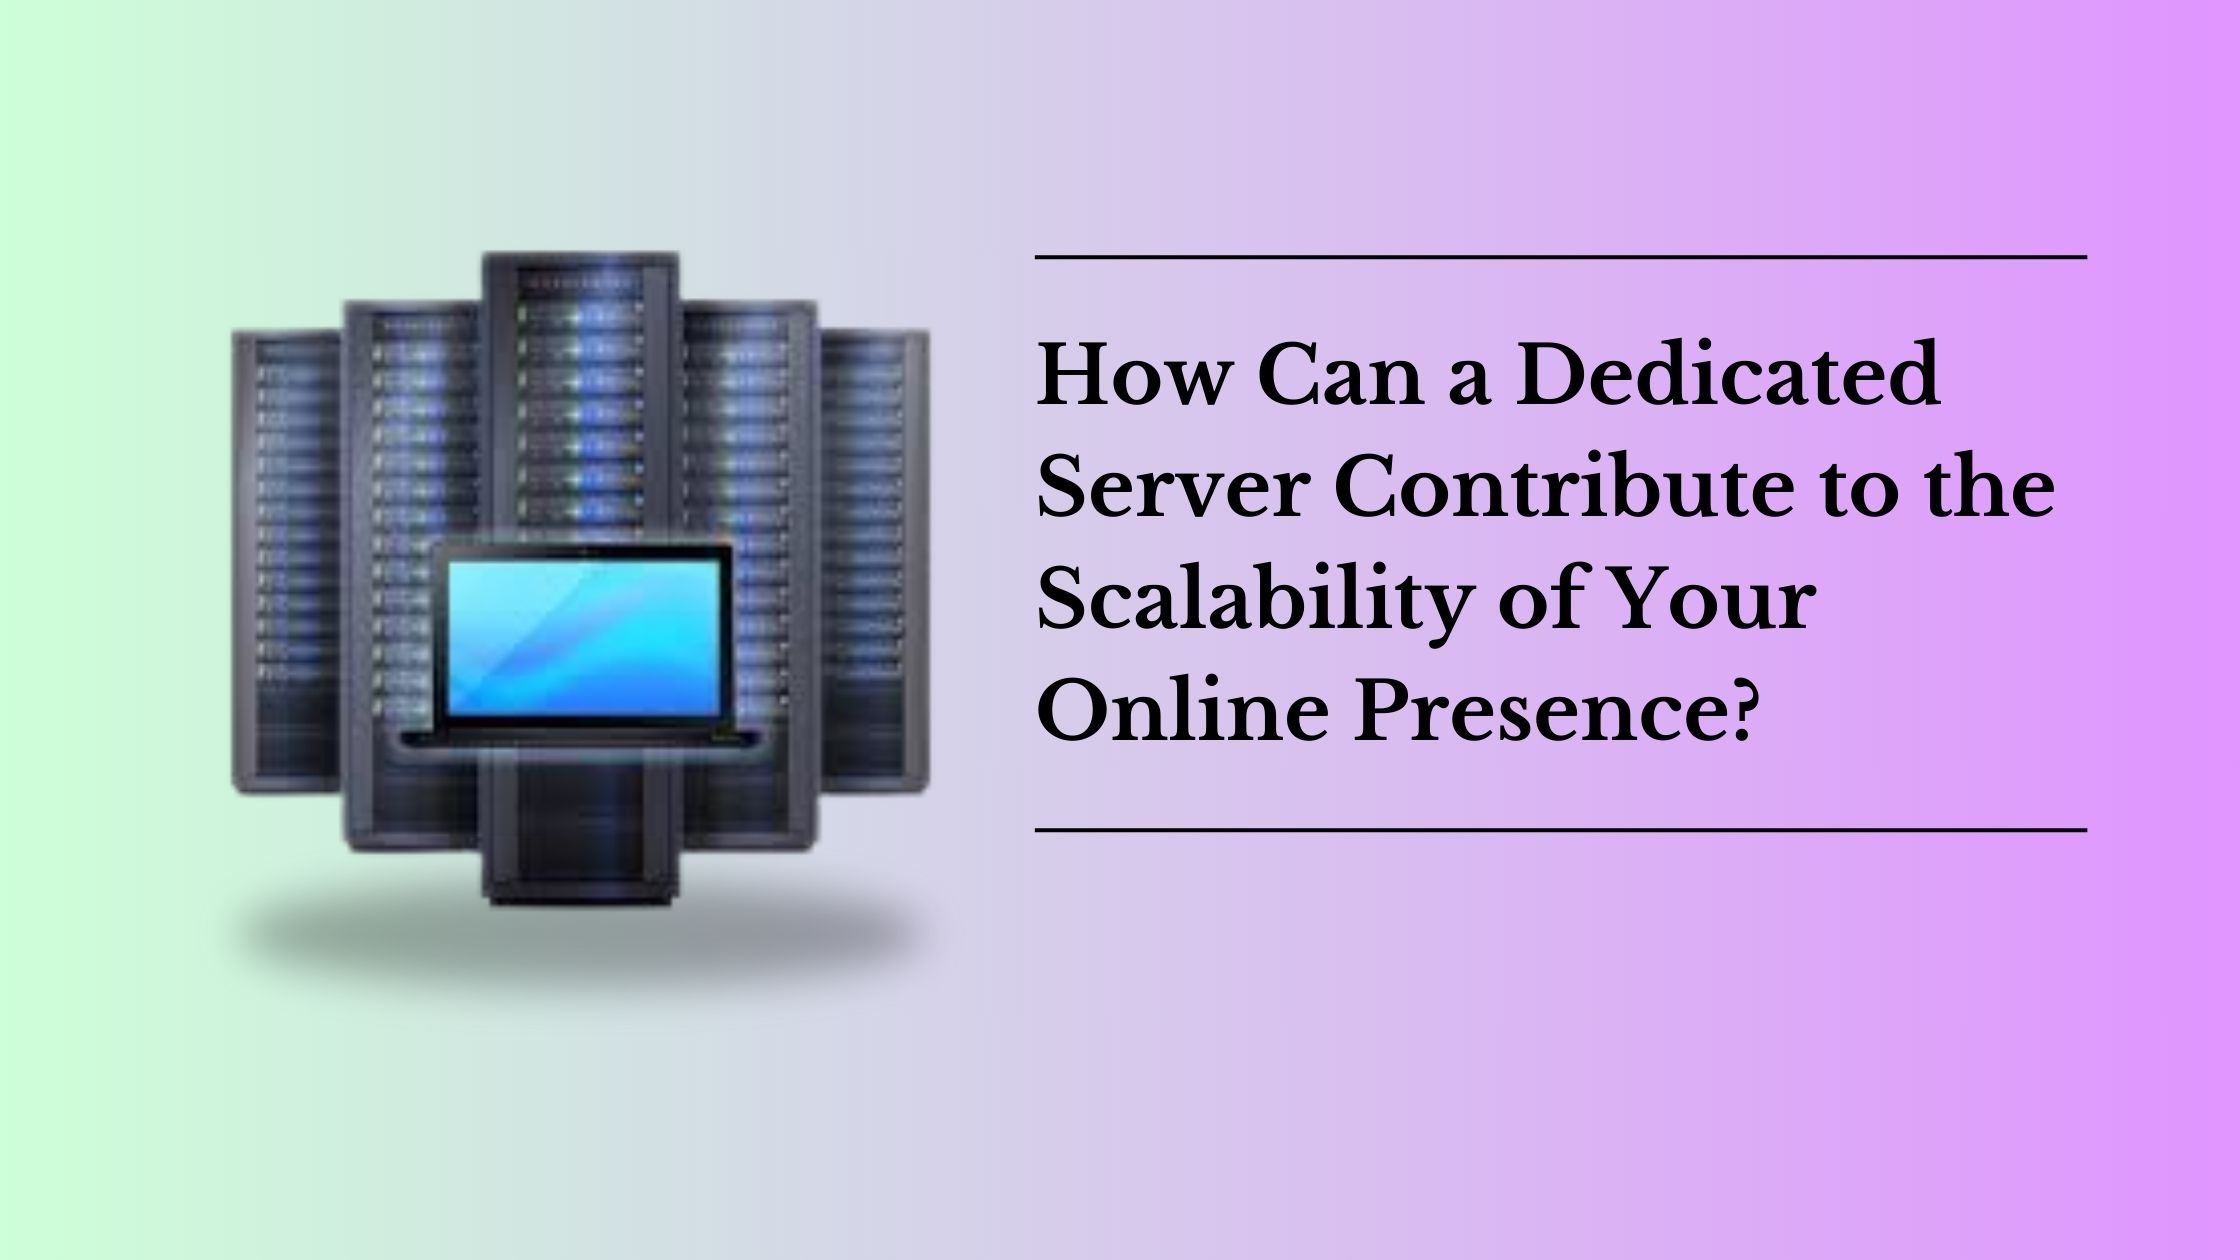 How Can a Dedicated Server Contribute to the Scalability of Your Online Presence?